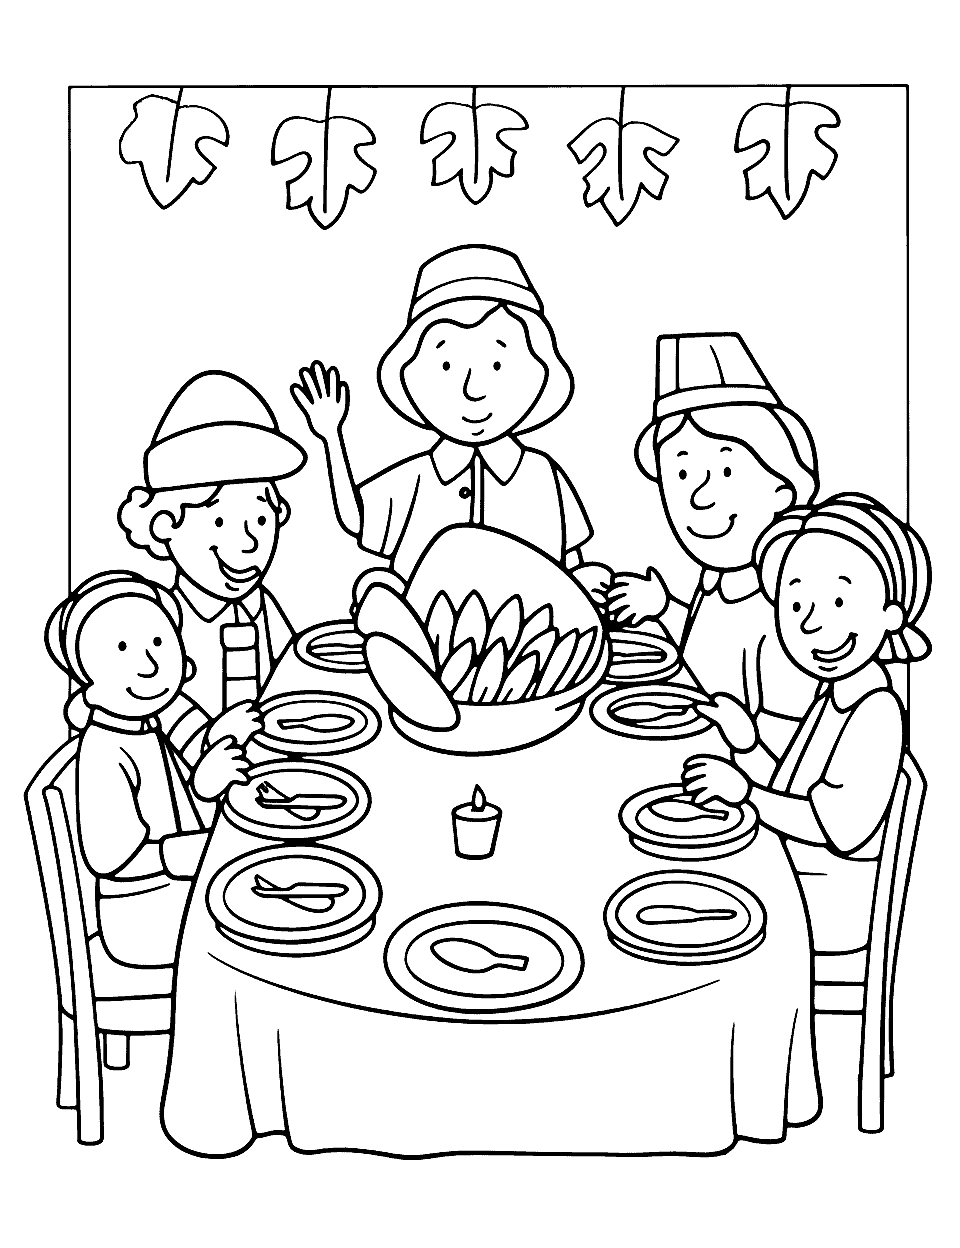 Pilgrims and Indians Thanksgiving Coloring Page - Kindergarten level coloring page of pilgrims and Native Americans sharing the first Thanksgiving meal.